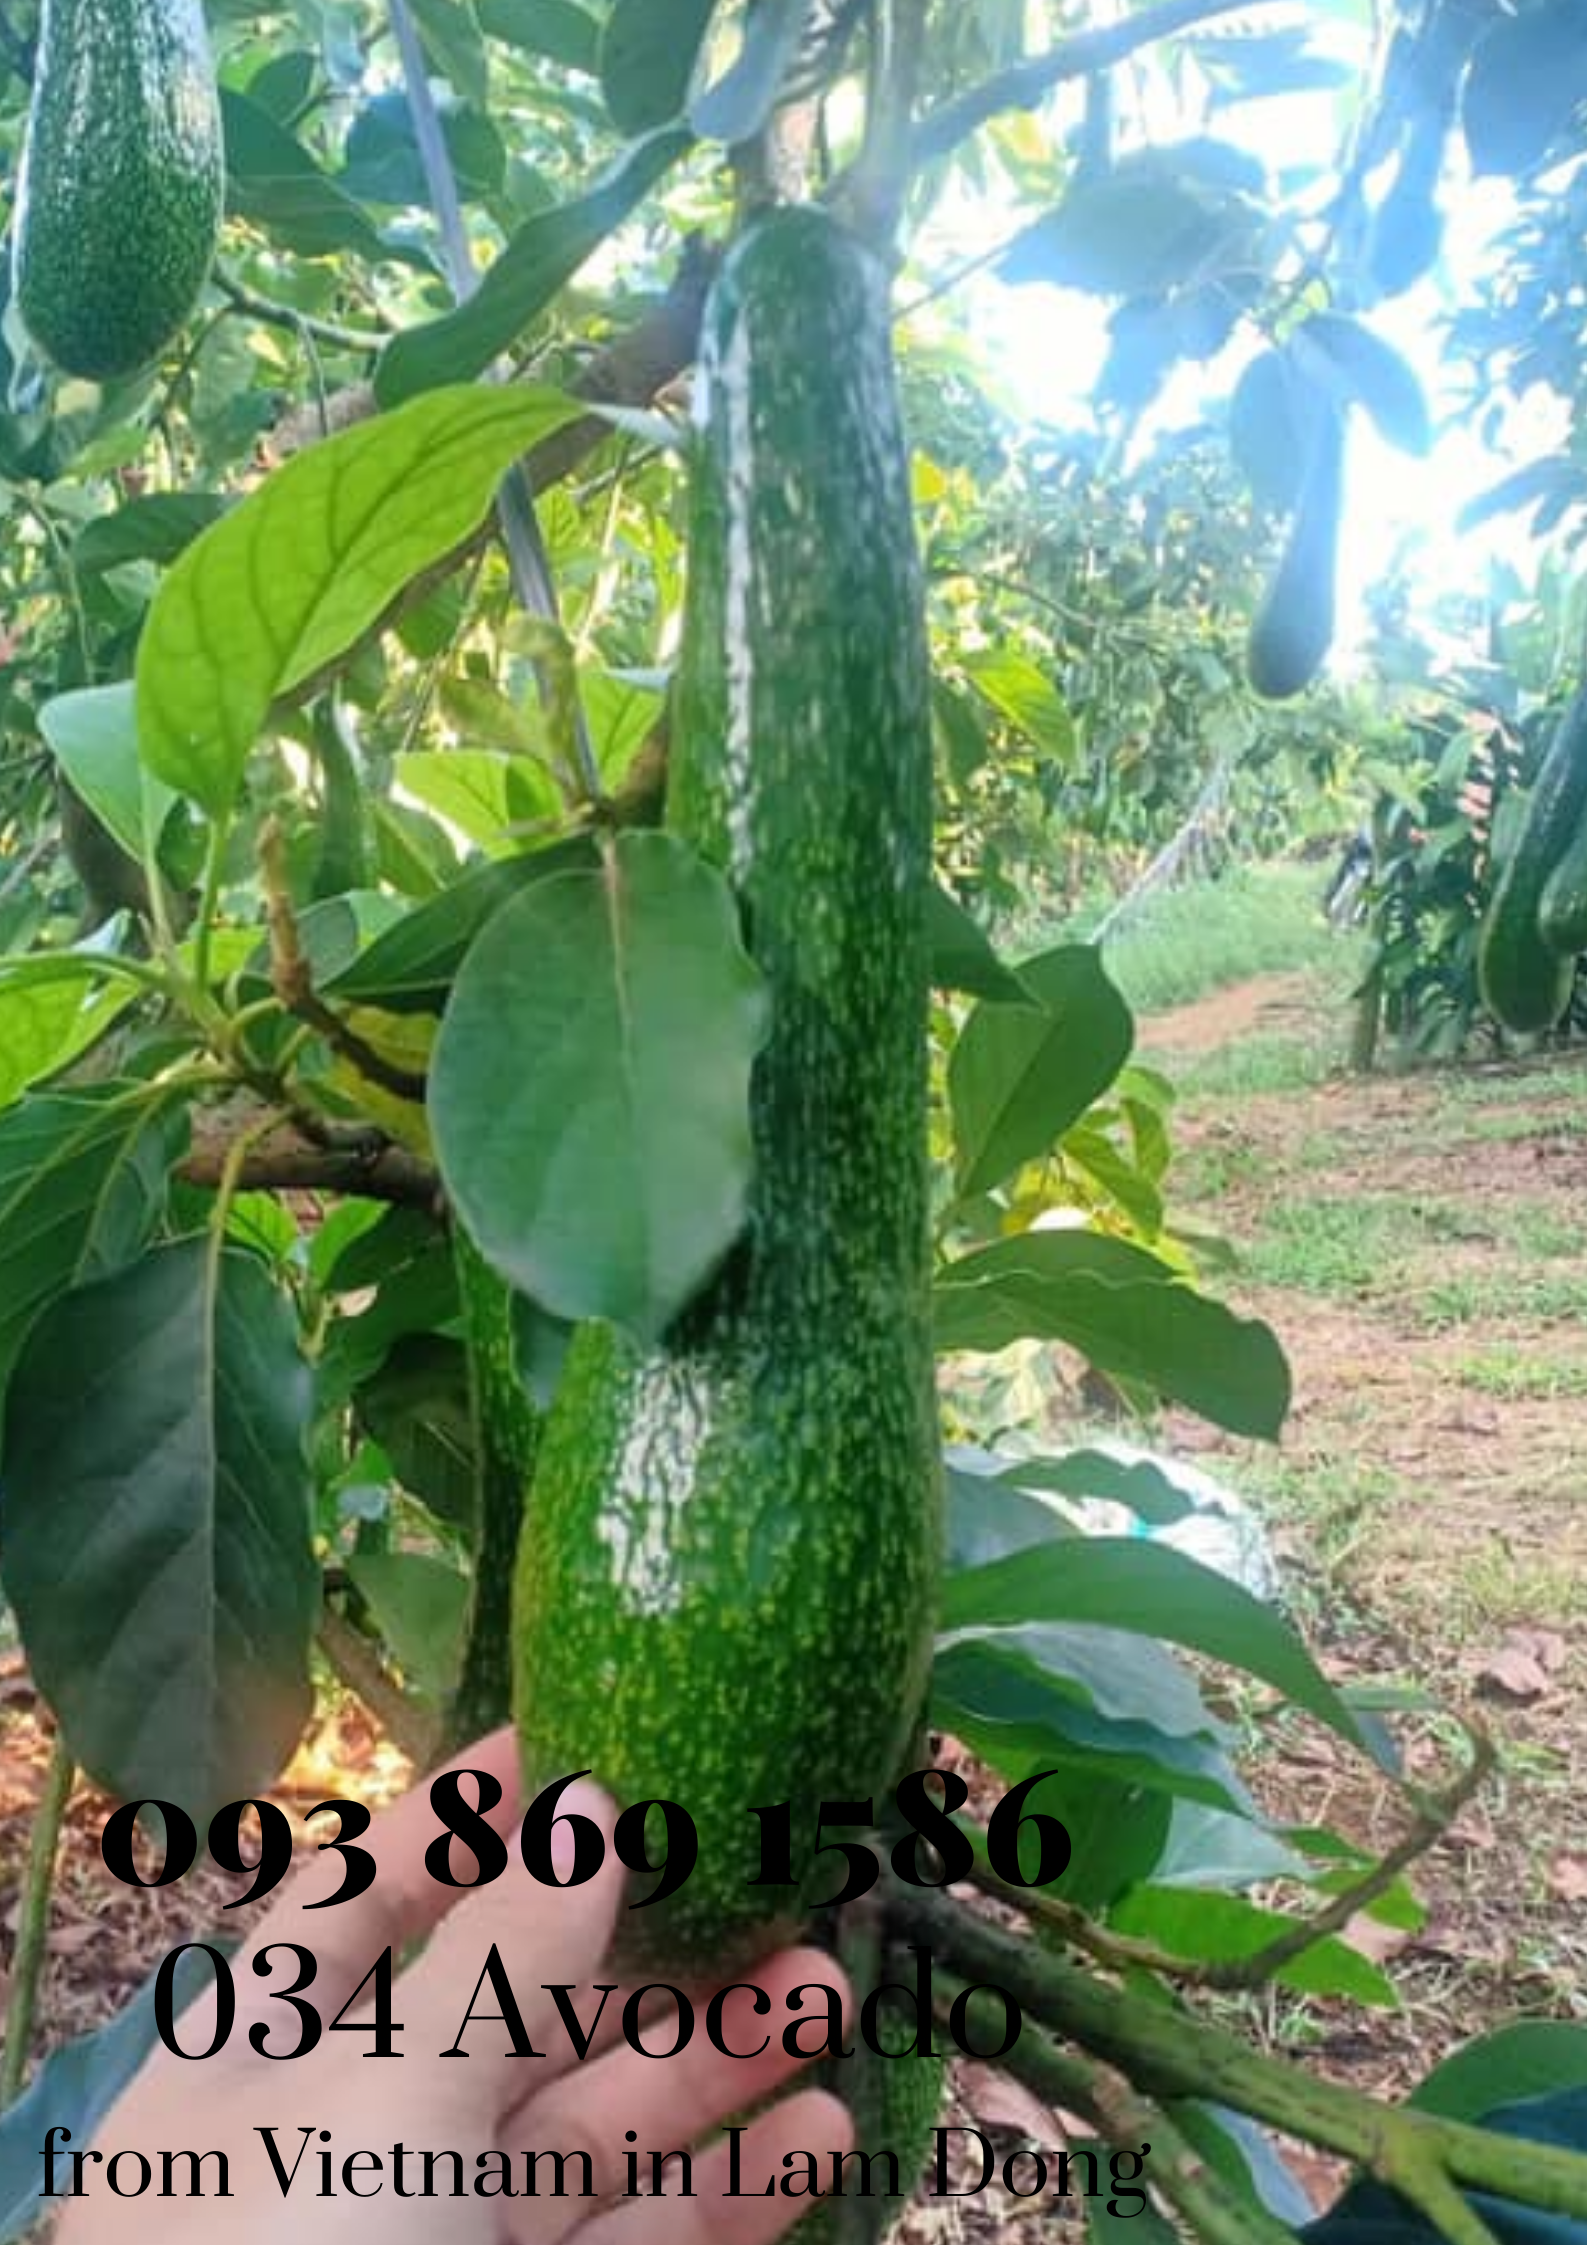  034 Avocado from Vietnam in Lam Dong for export